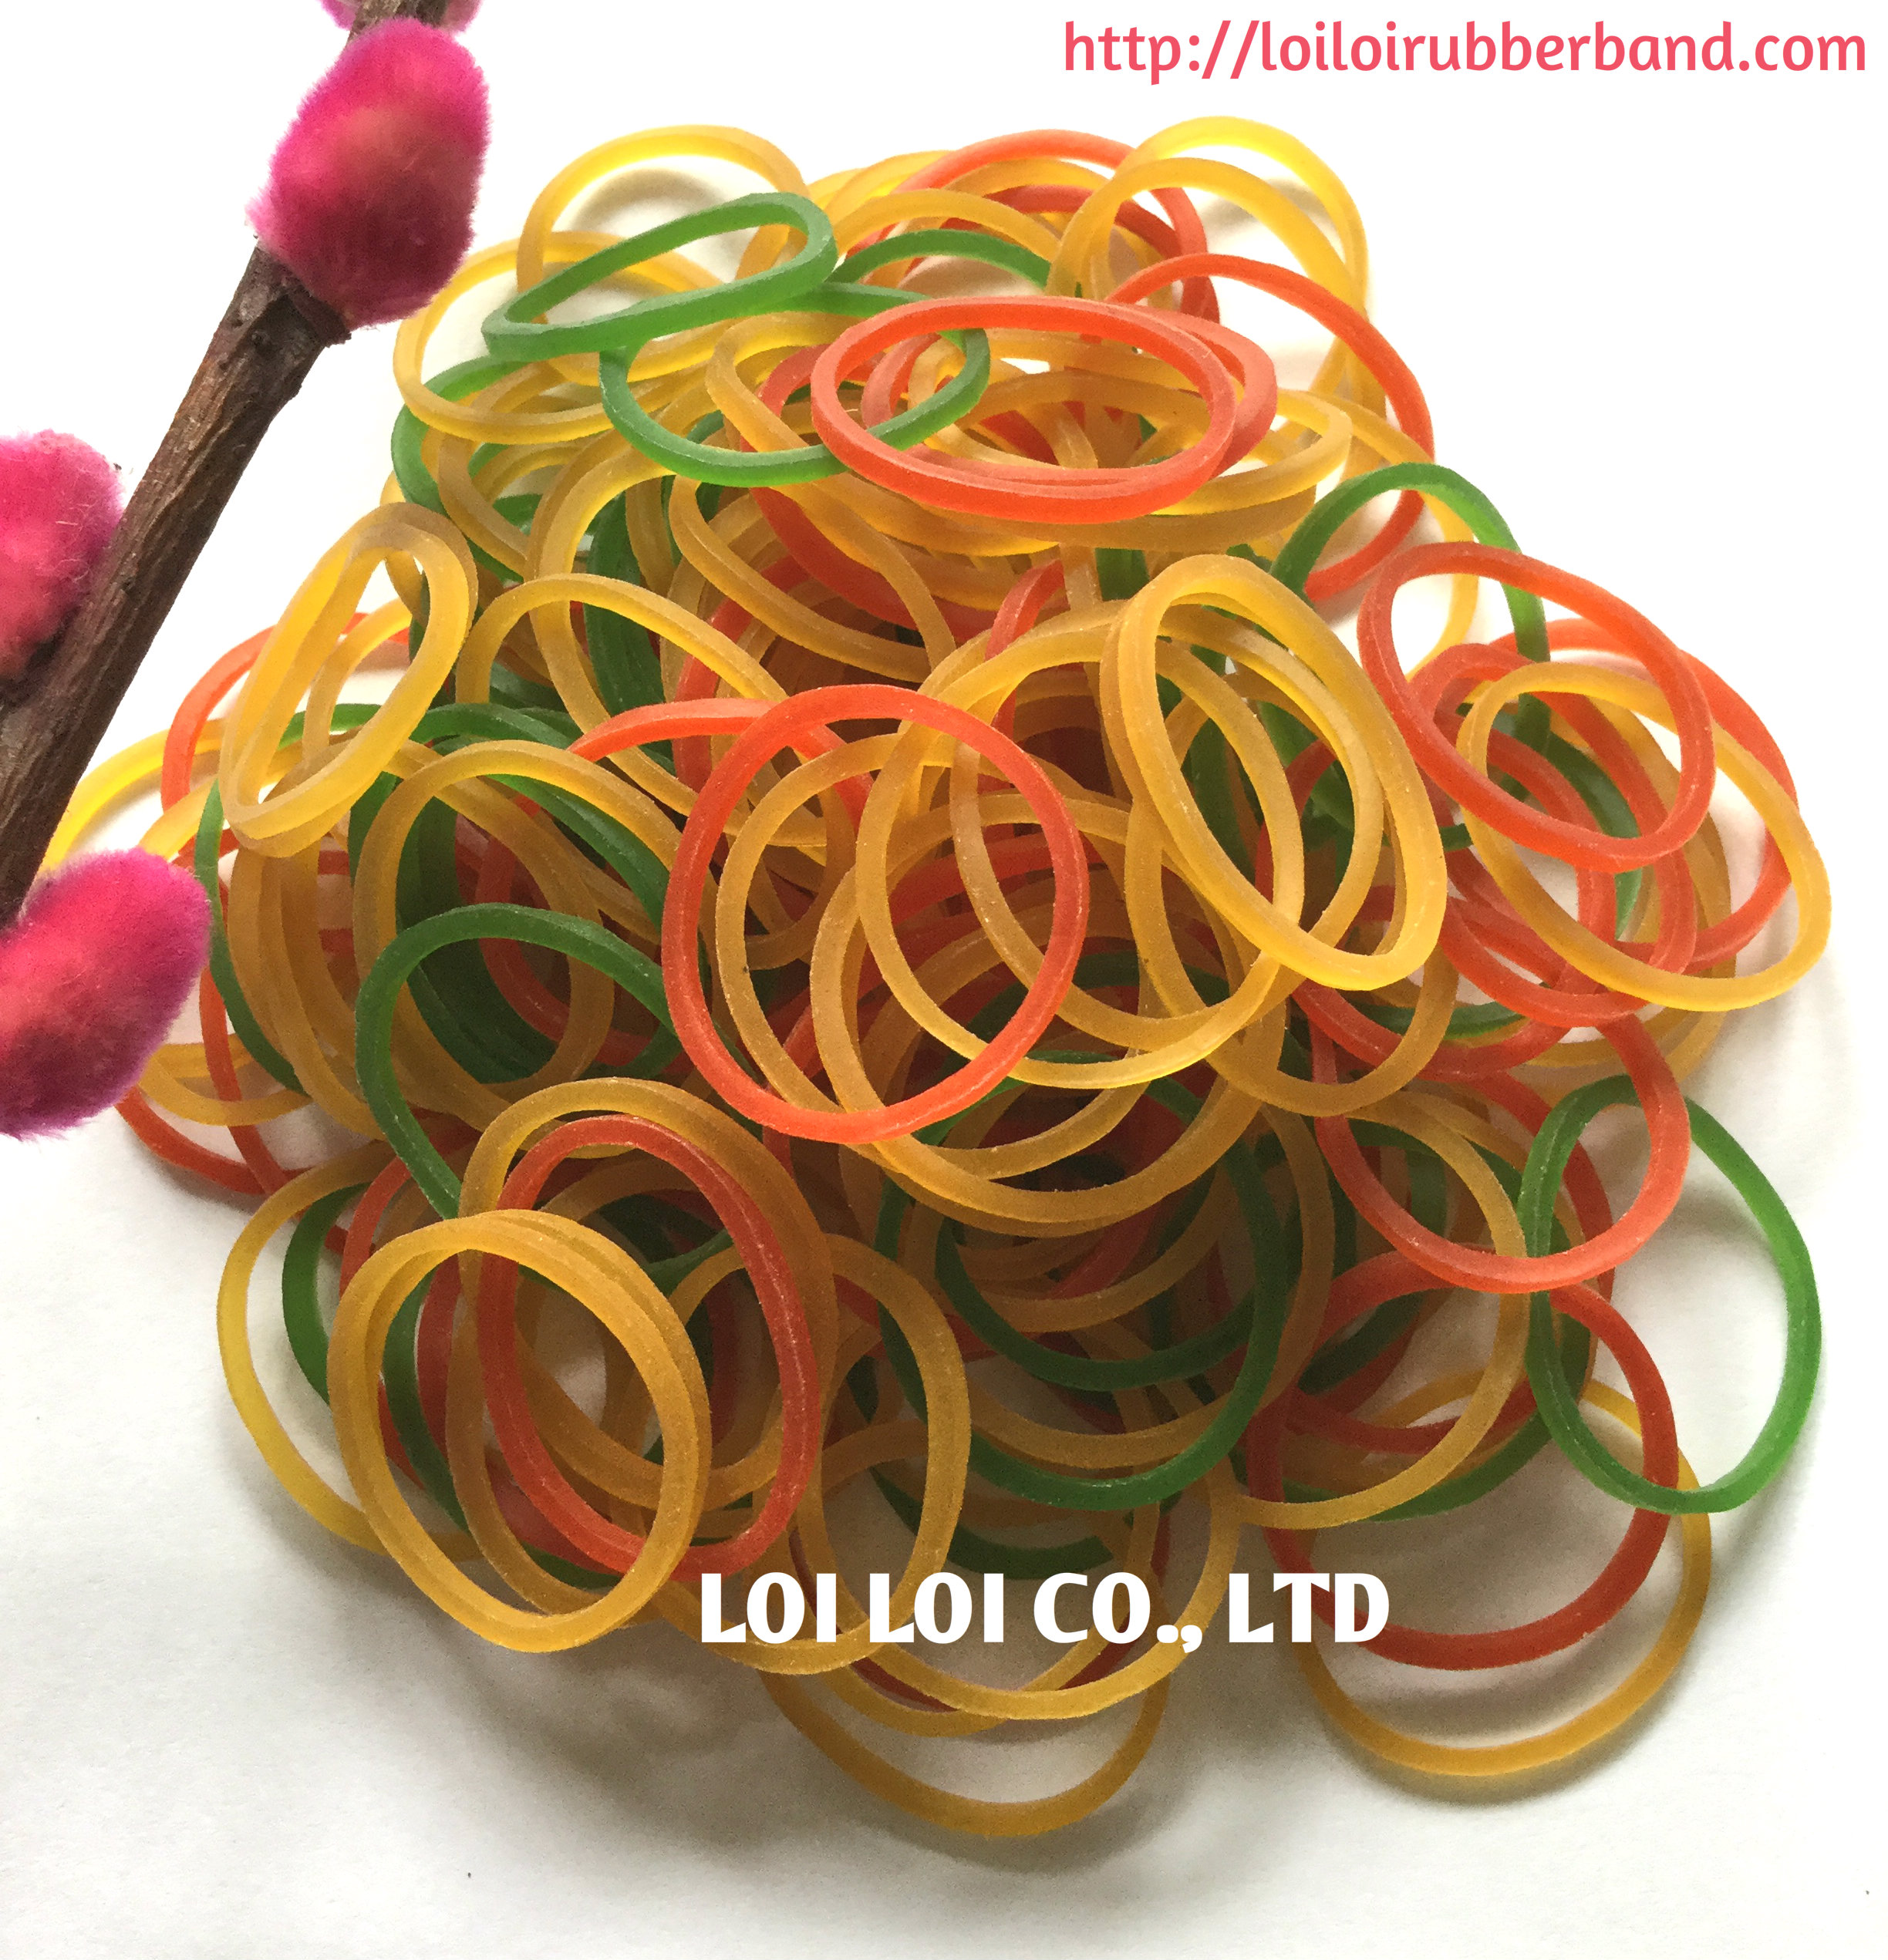 Hot item Vegetable natural rubber band tie money OEM service custom rubber band 100% pure wholesale with standard quality export